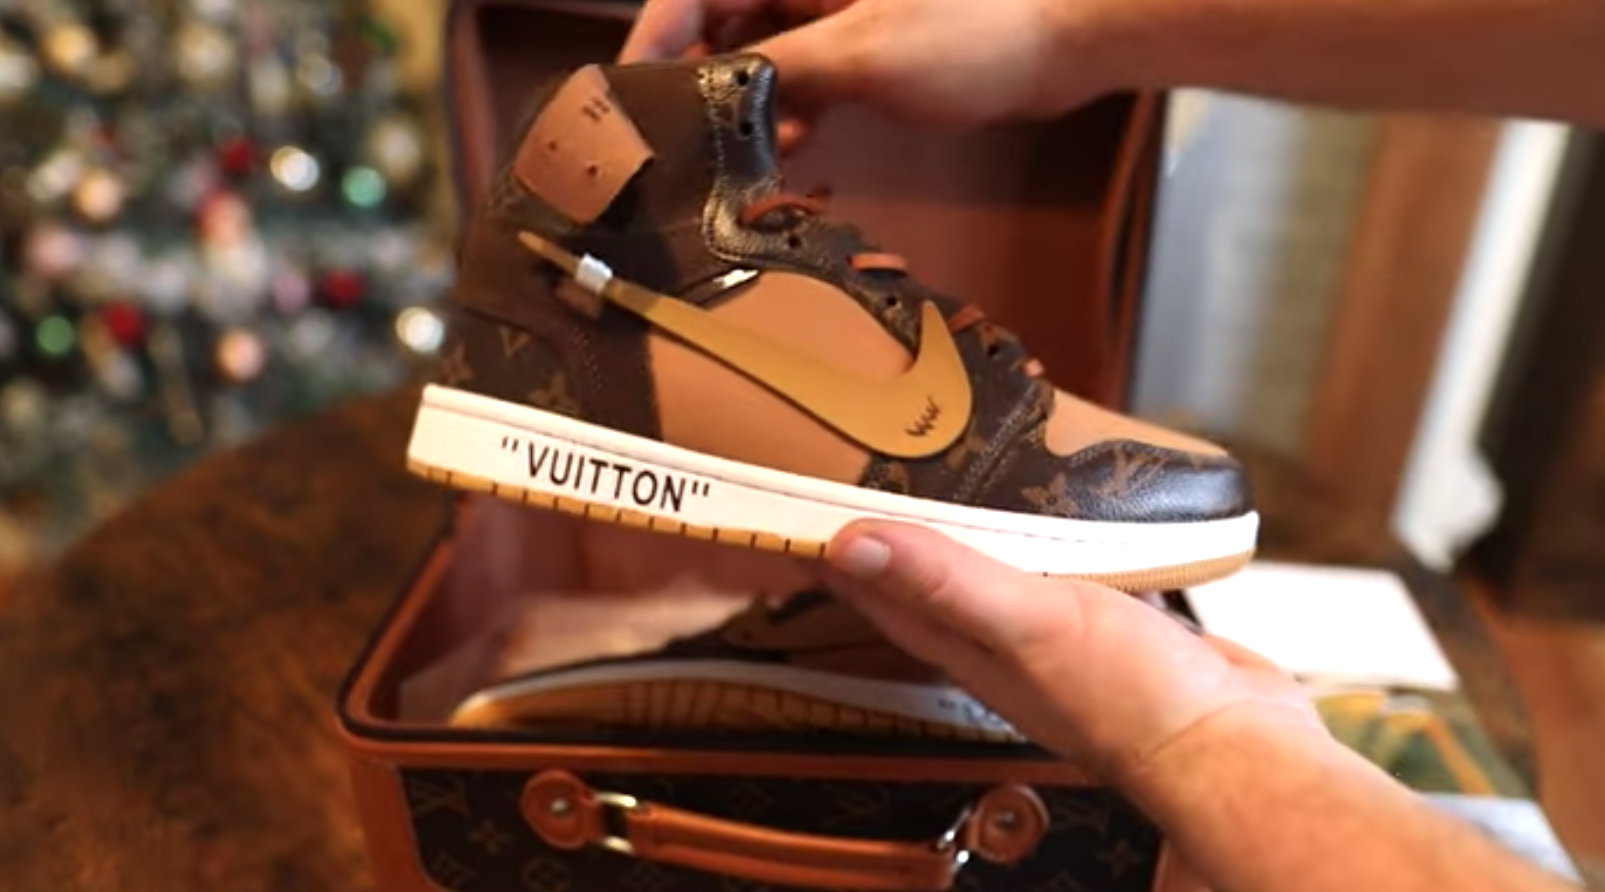 BIG UNBOXING // Louis Vuitton Keepall Vintage - Nike air max - Activewear  mix! 